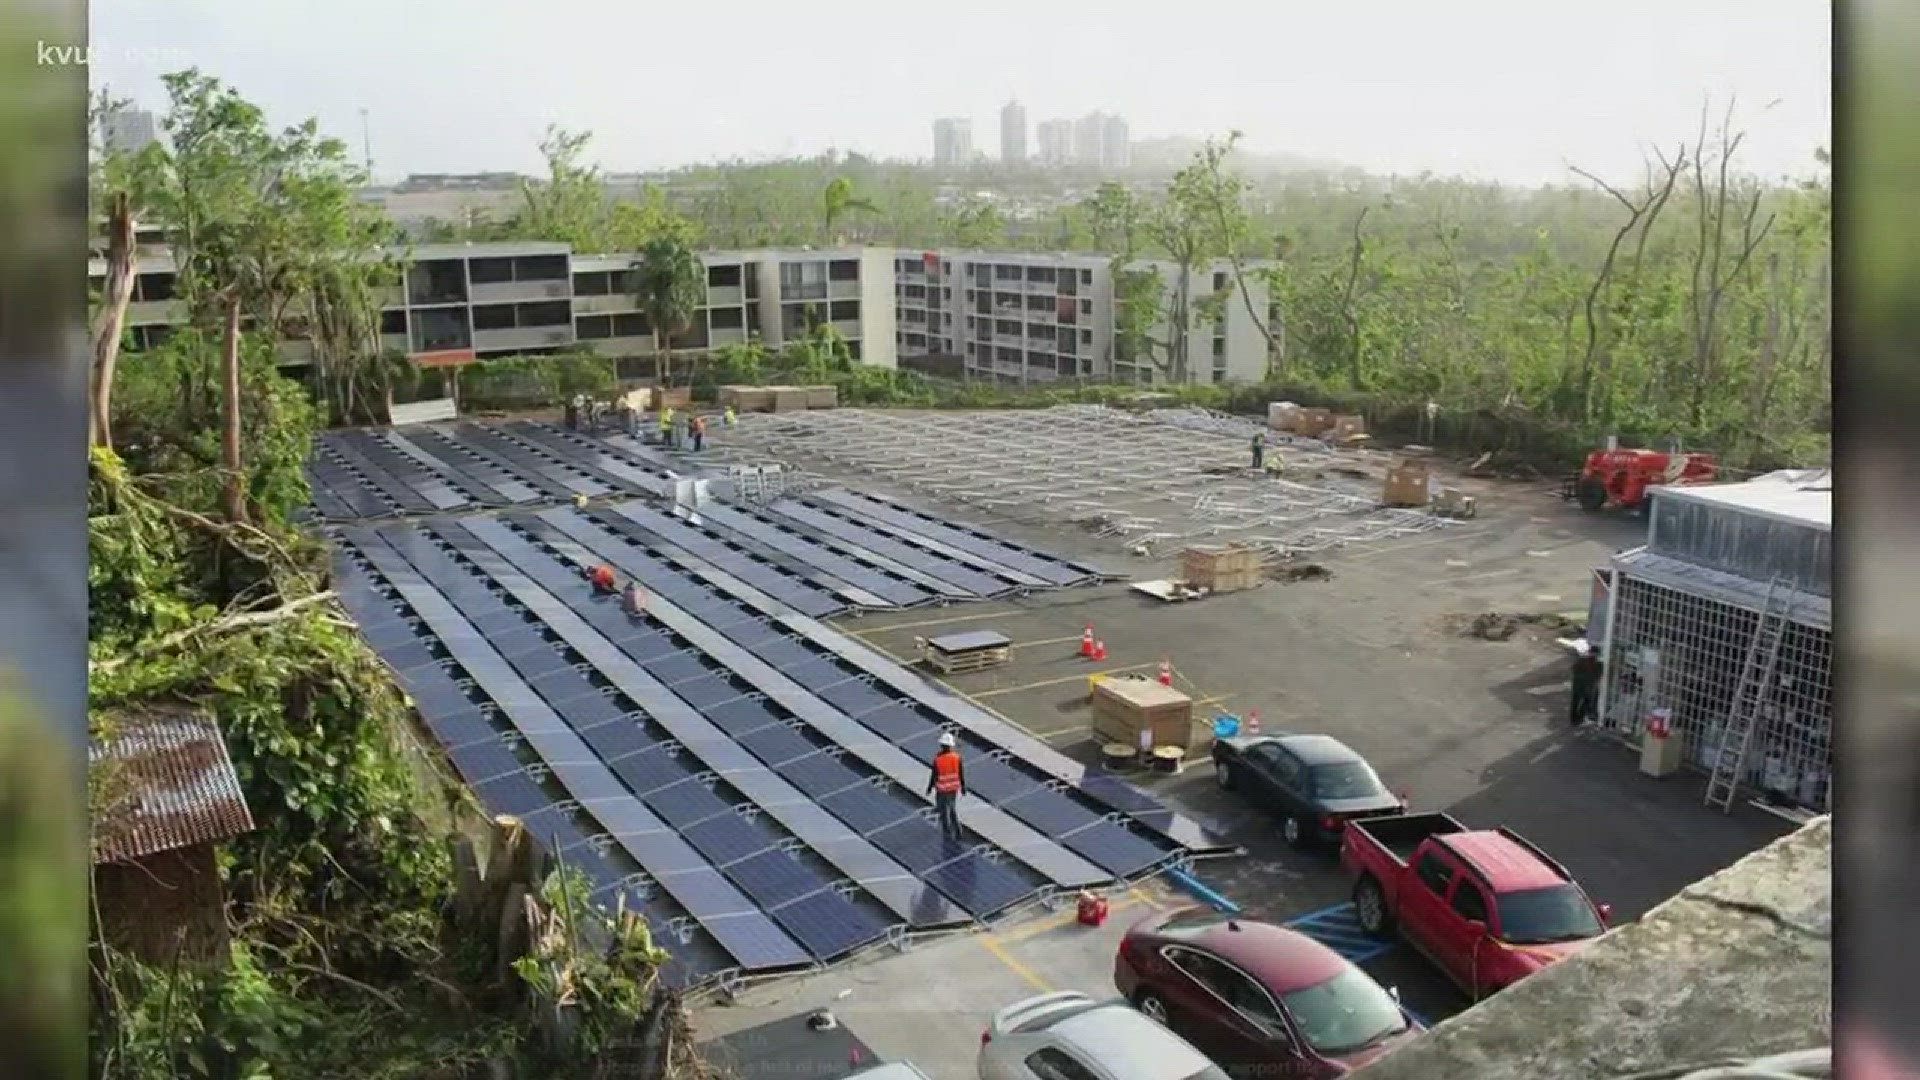 Tesla is helping out with Puerto Rico's hurricane relief efforts by providing solar panels that are now running the children's hospital in San Juan.